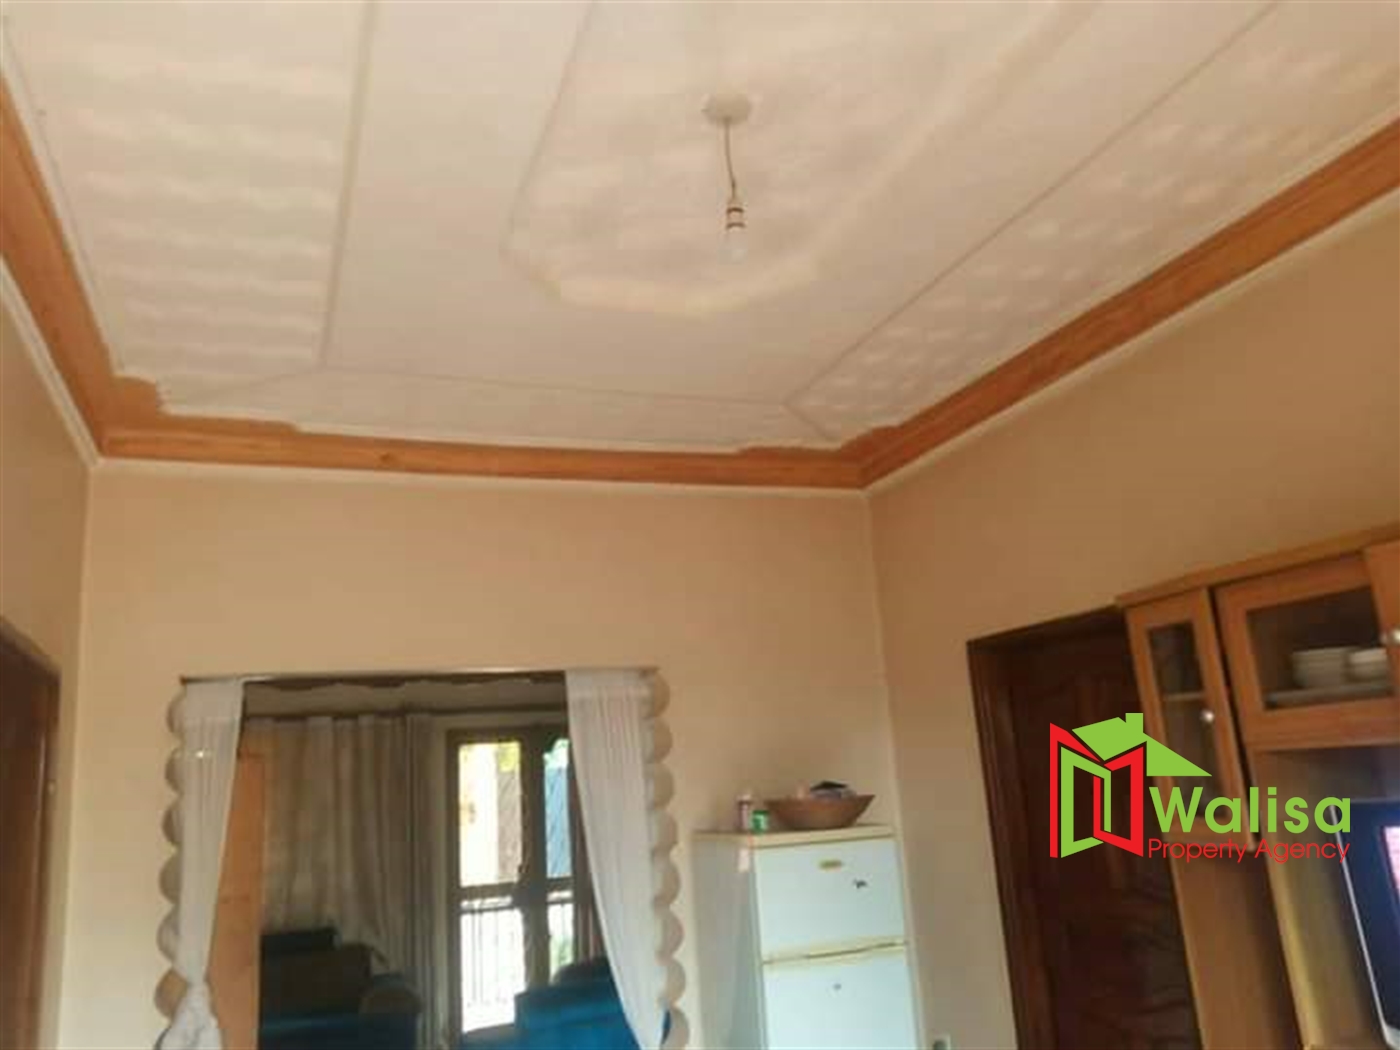 Town House for sale in Mpererwe Kampala